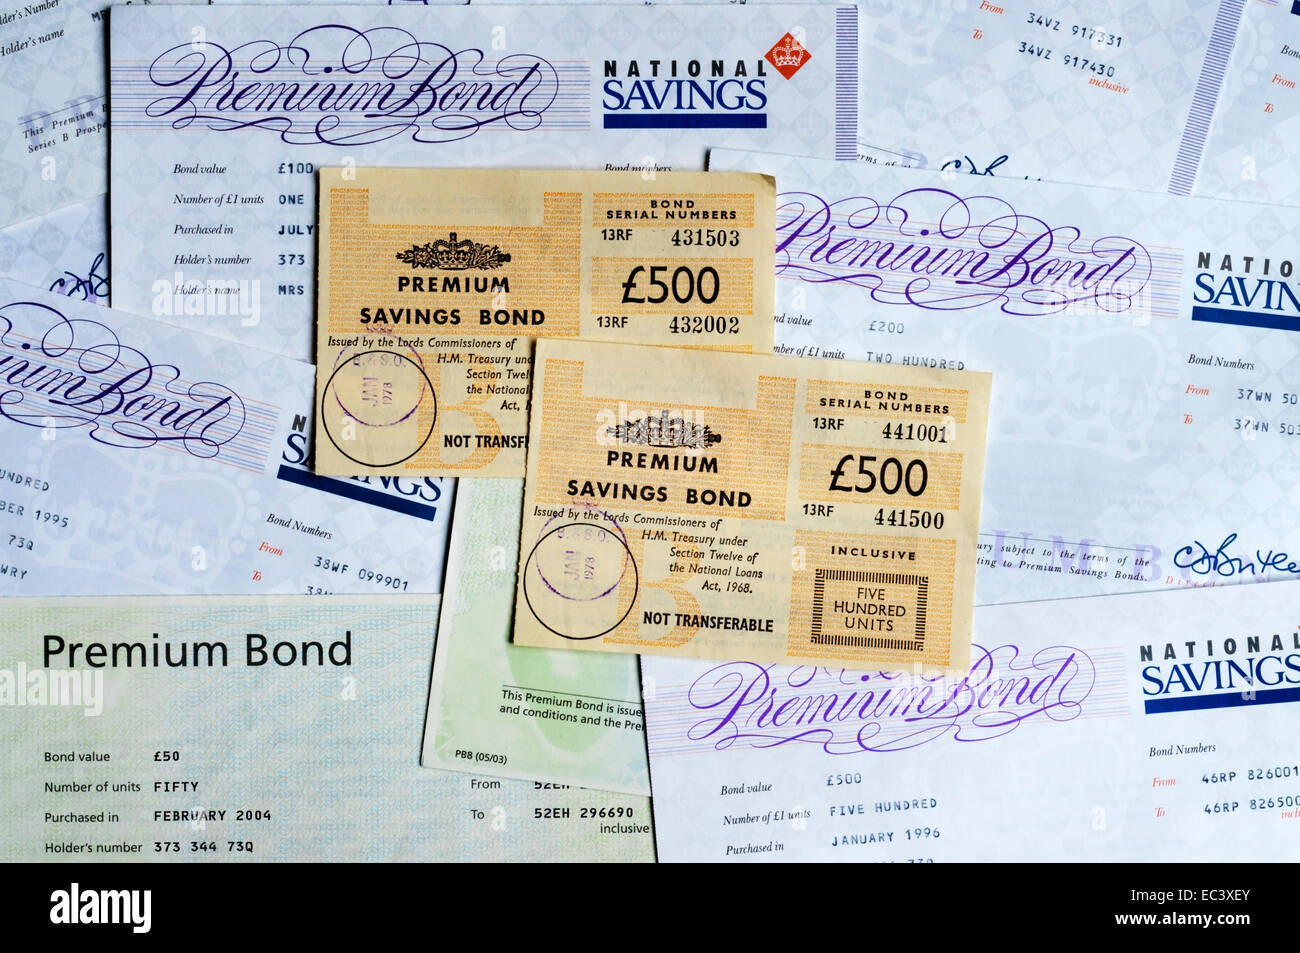 A variety of styles of Premium Savings Bond certificates from 1970s to 2004. Stock Photo